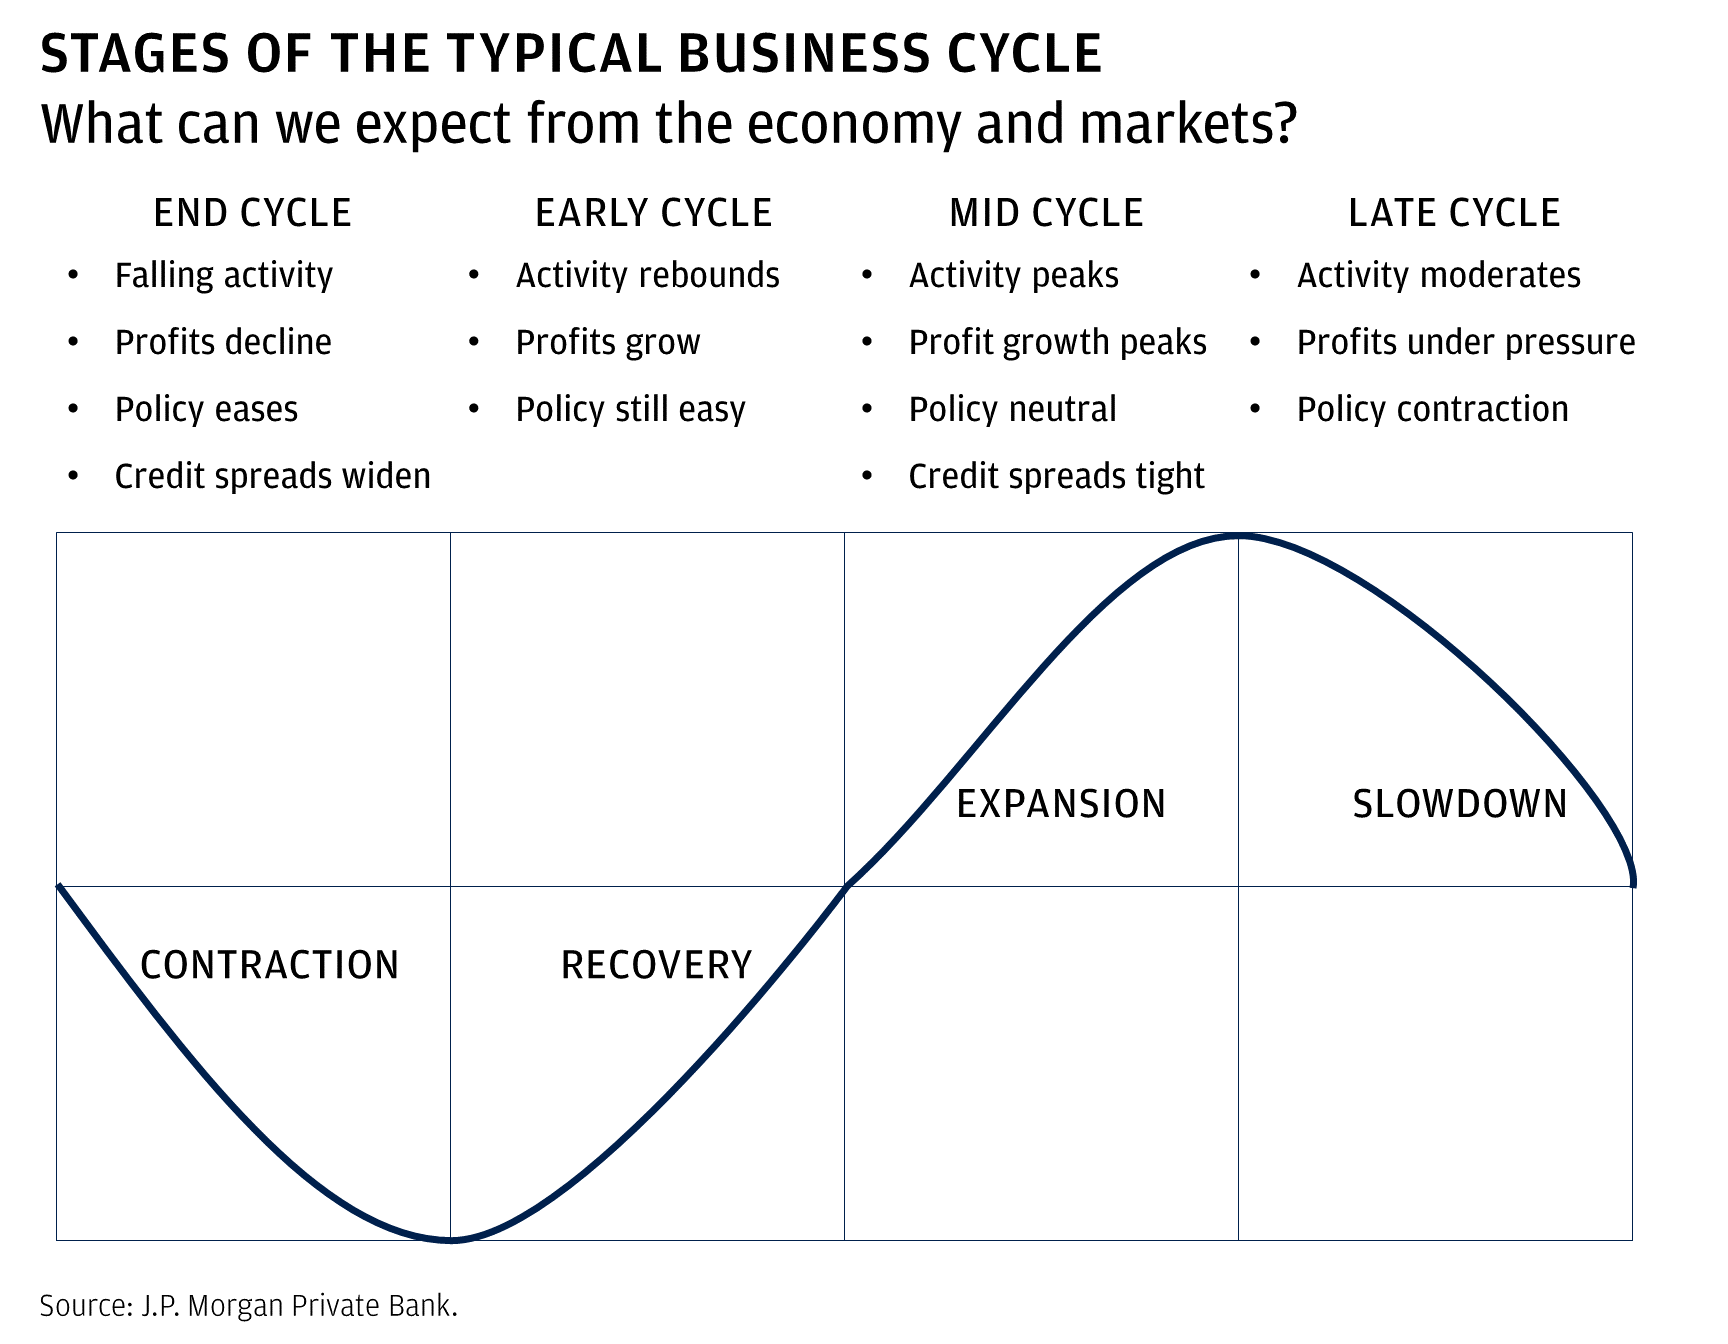 https://assets.jpmprivatebank.com/content/dam/jpm-wm-aem/article-body/en/investing/investing-in-a-late-cycle-environment/Slide1.PNG